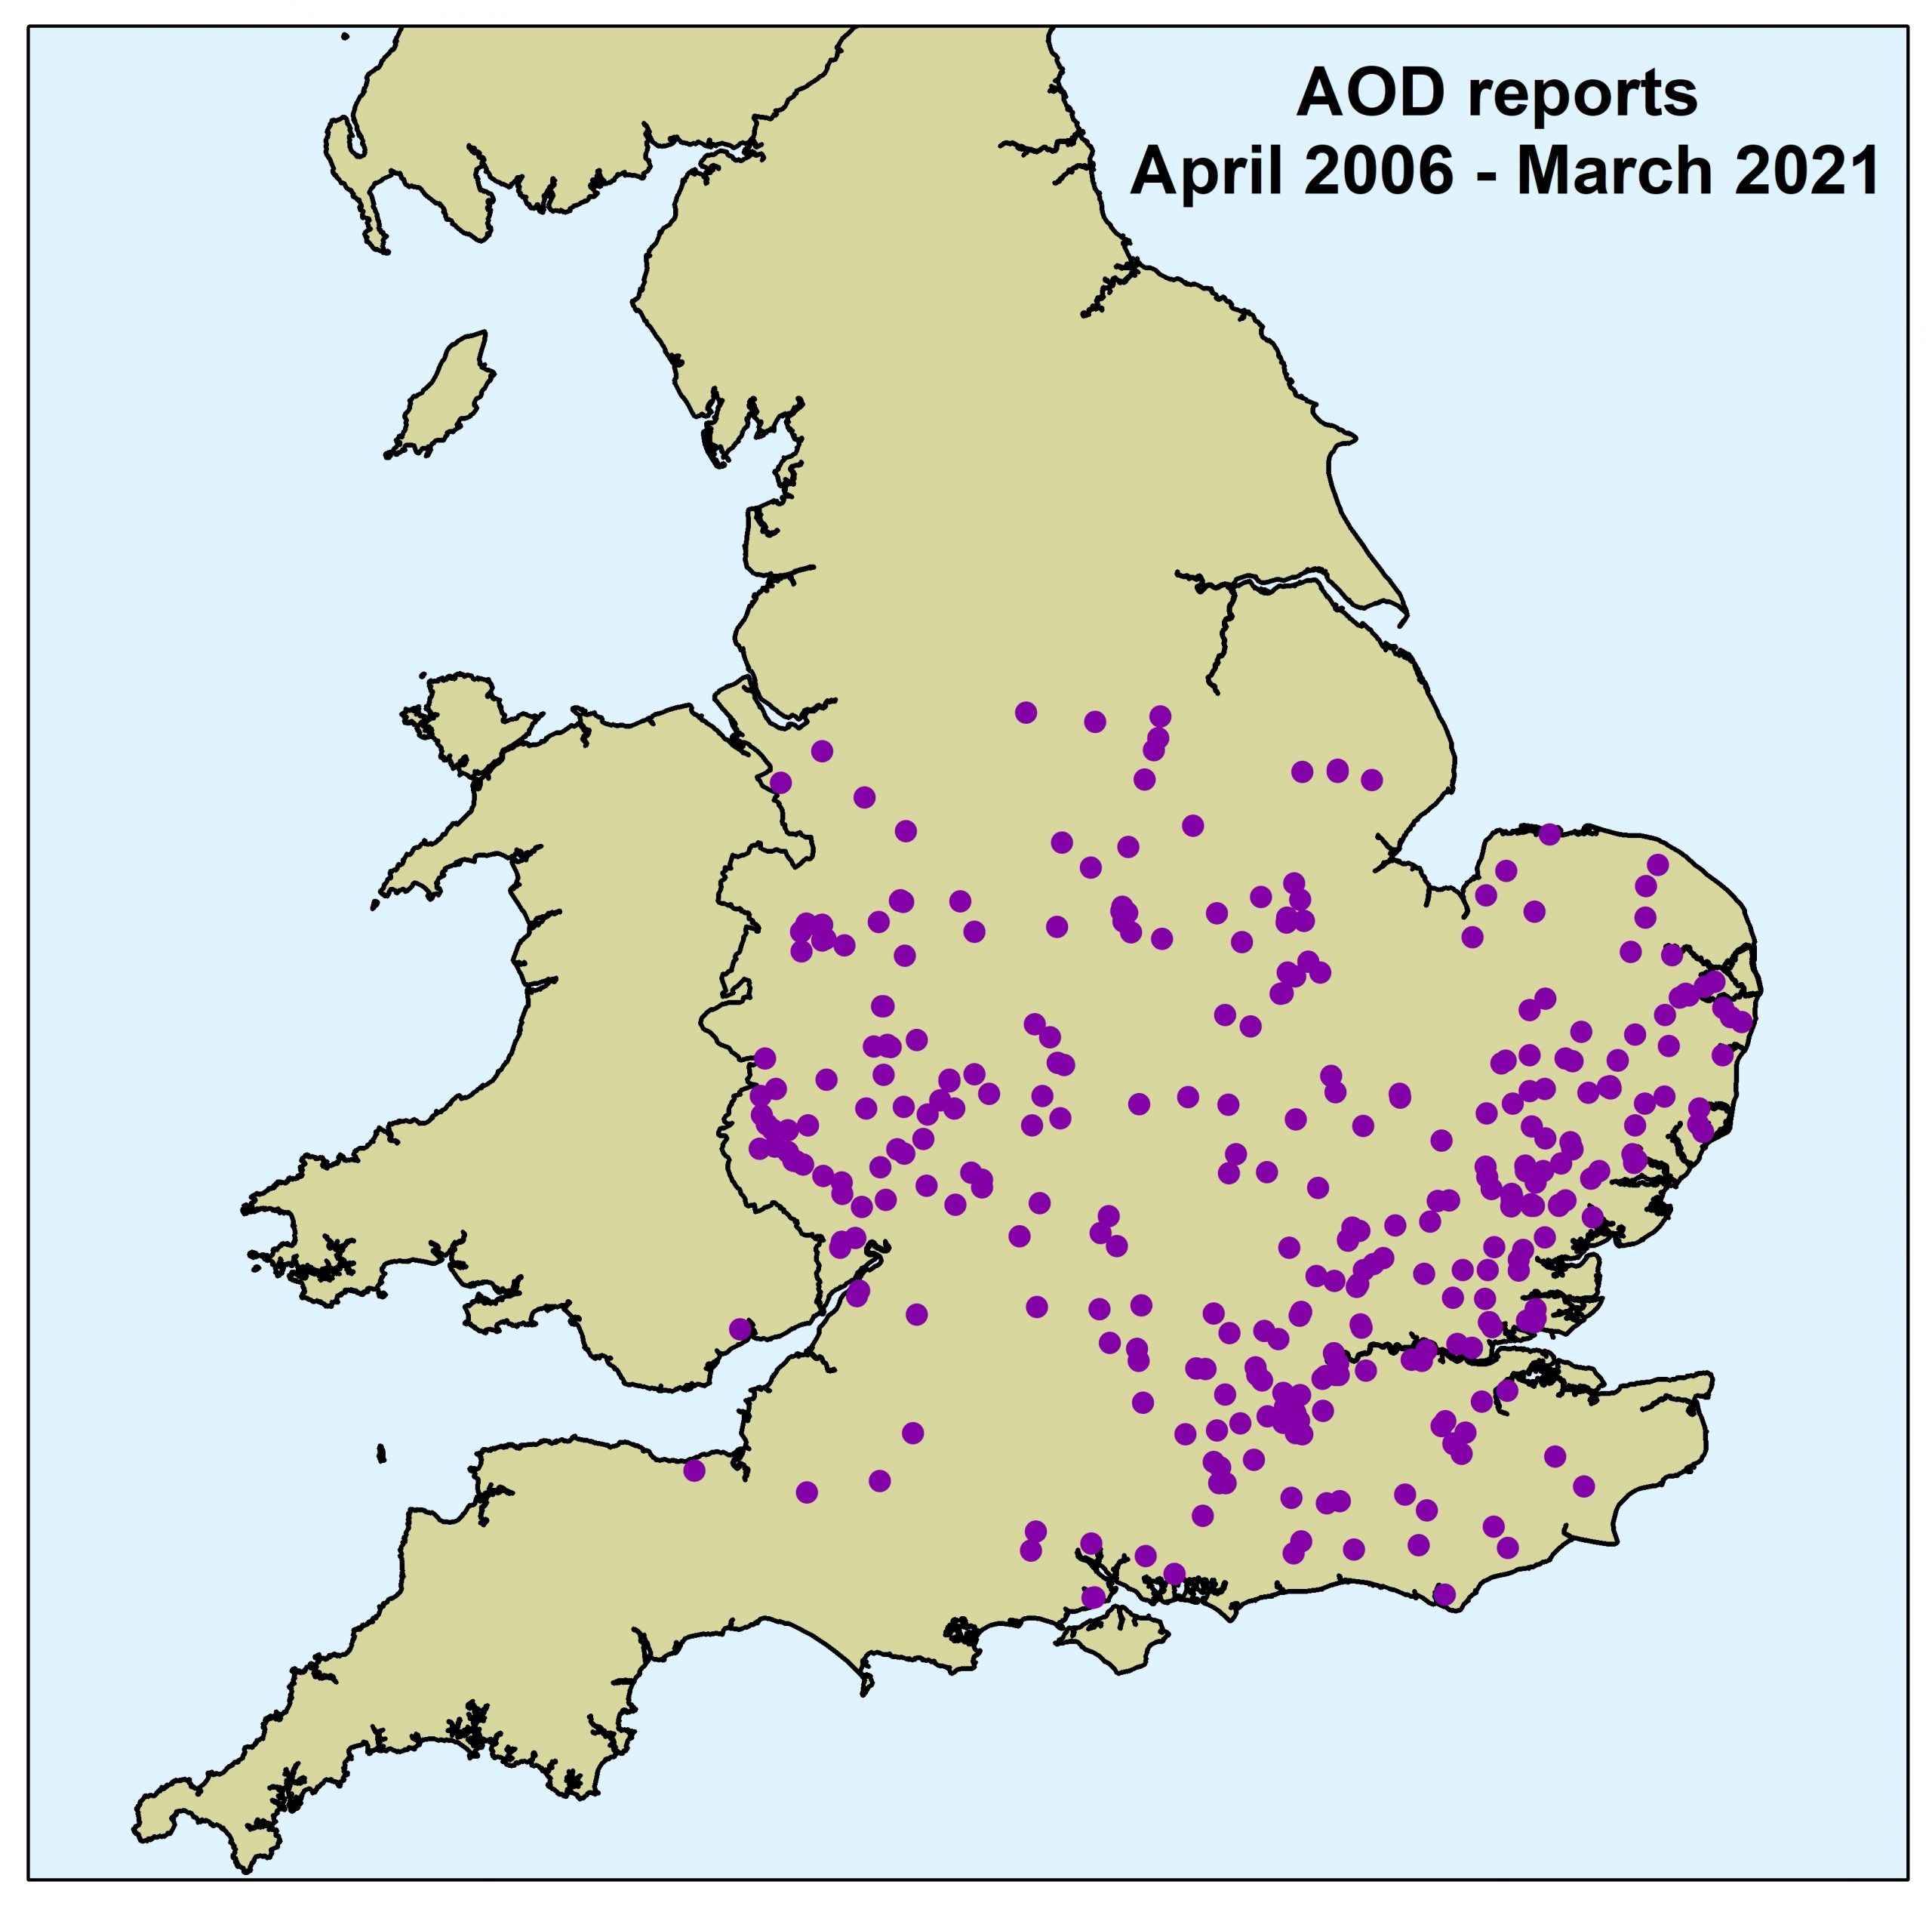 The map displays AOD locations of occurrence from 2006 to March 2021.